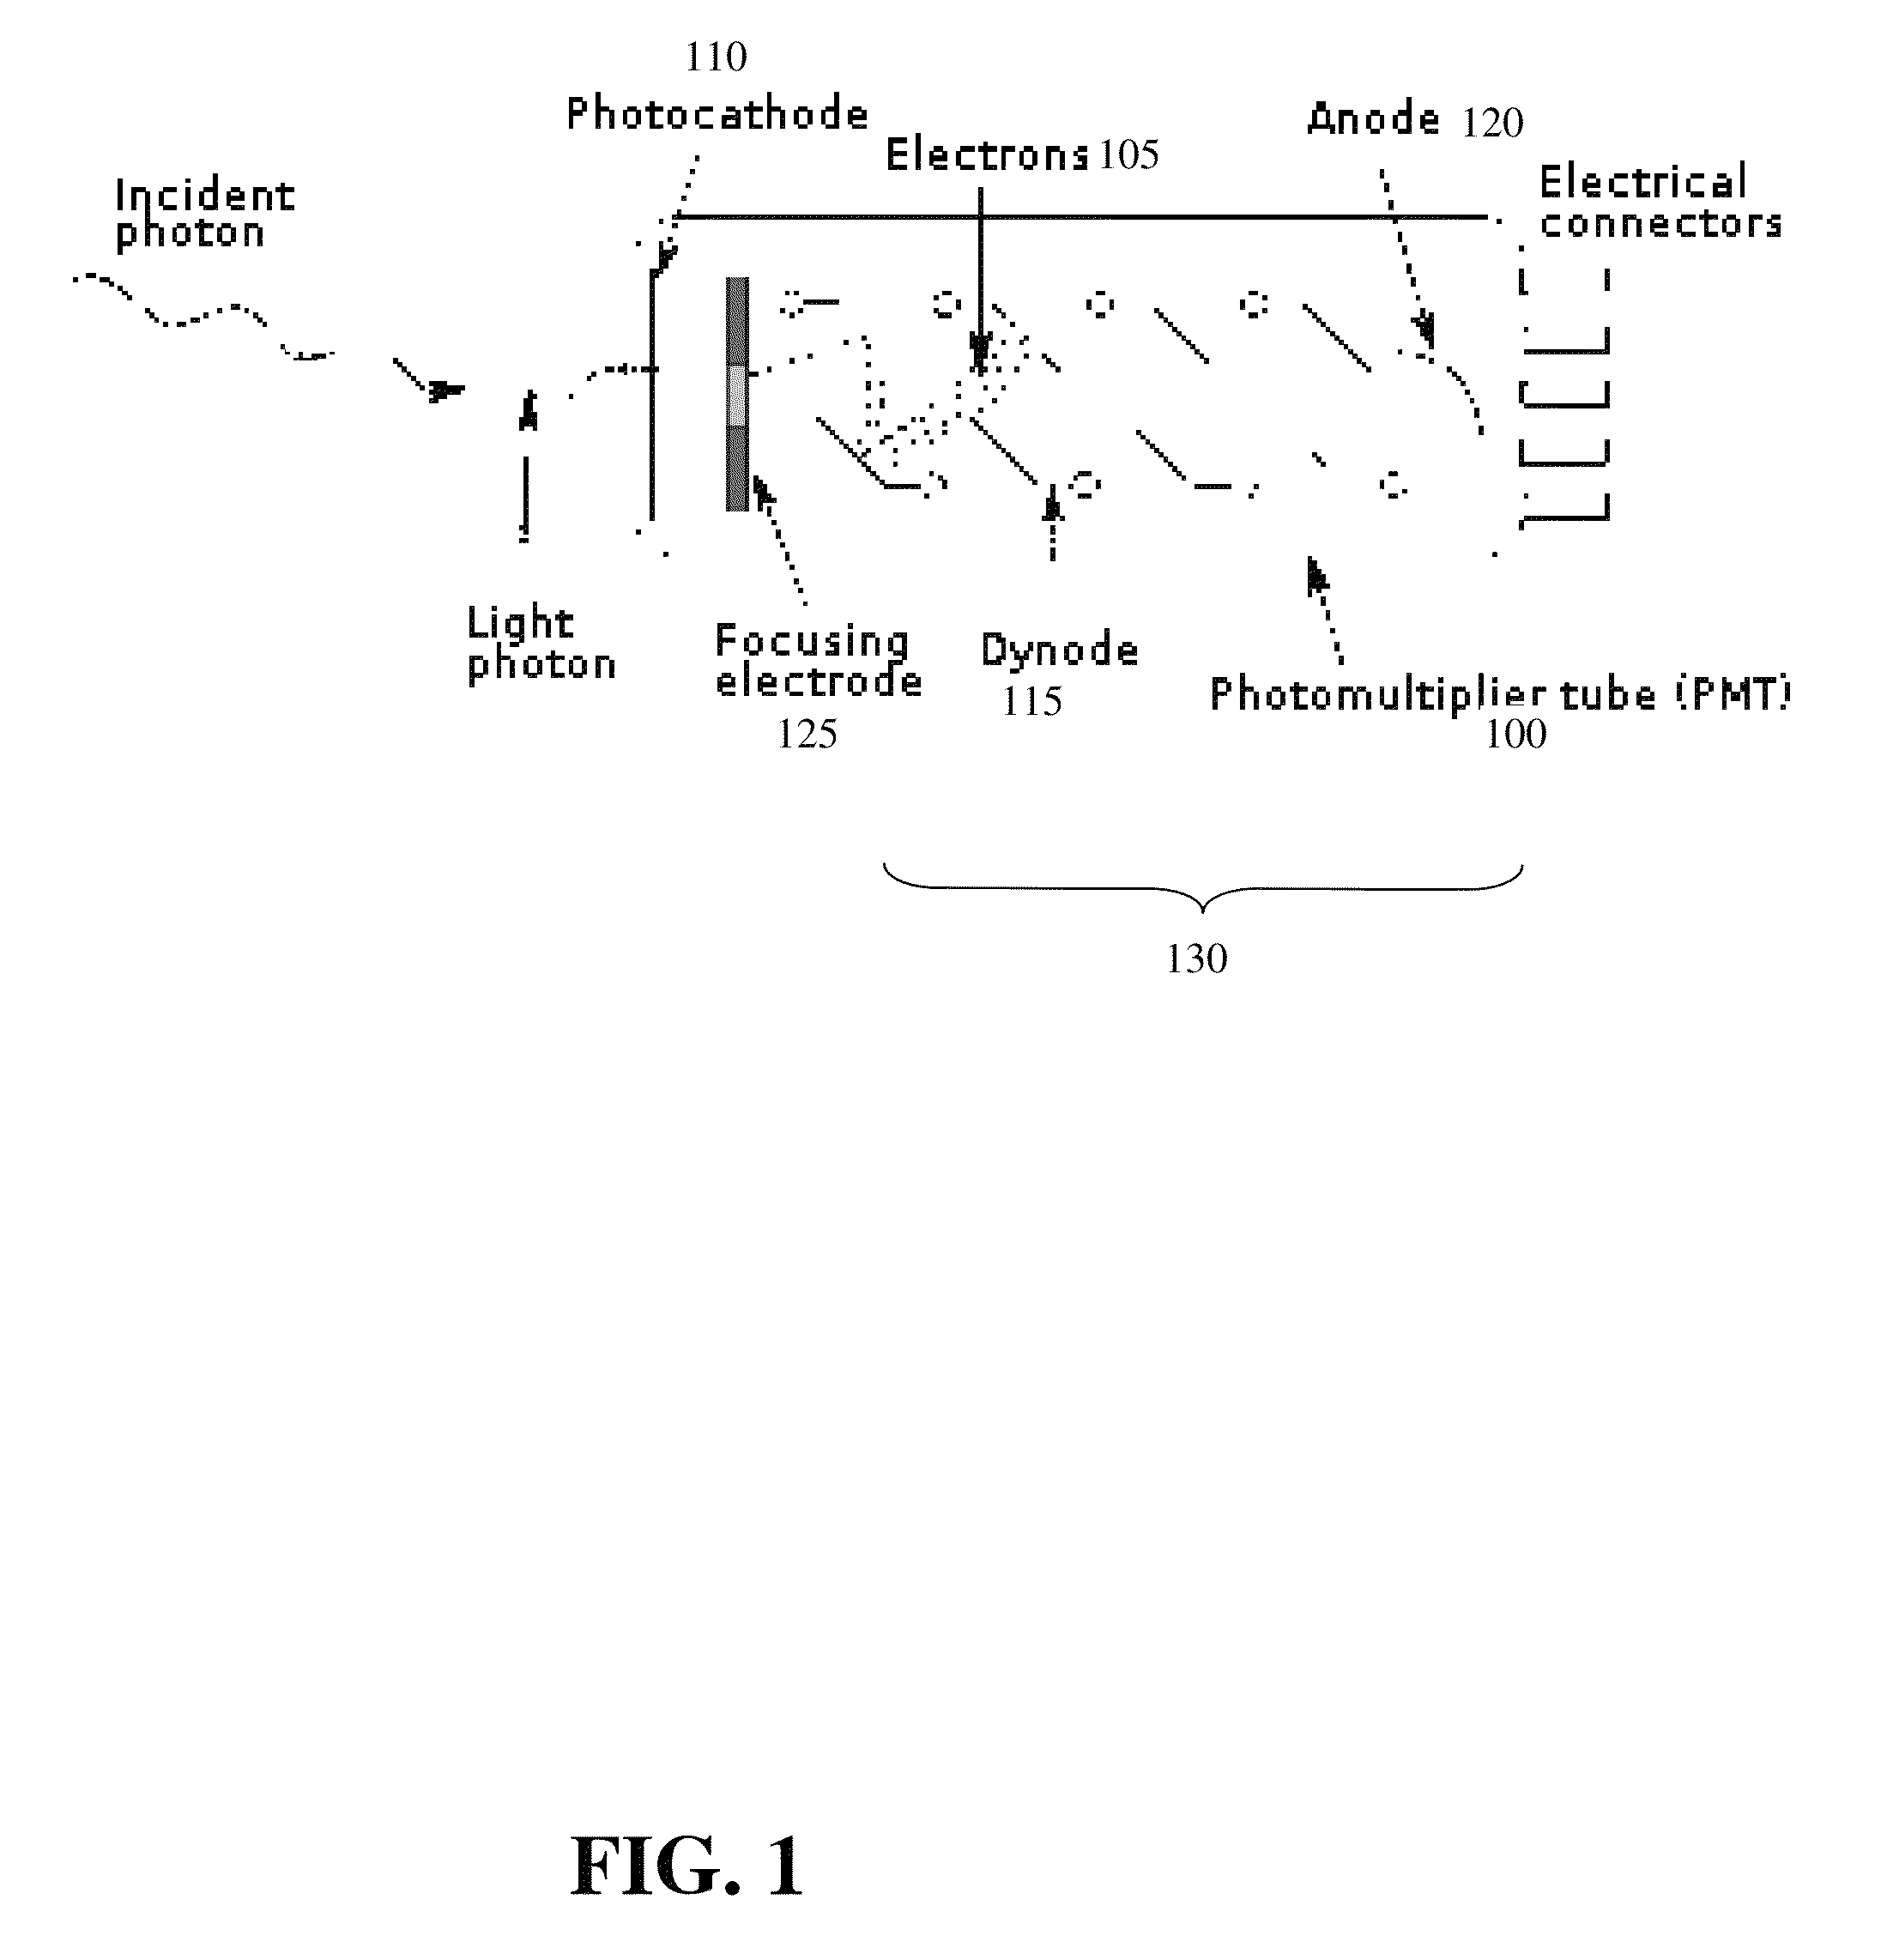 Photomultiplier tube optimized for surface inspection in the ultraviolet